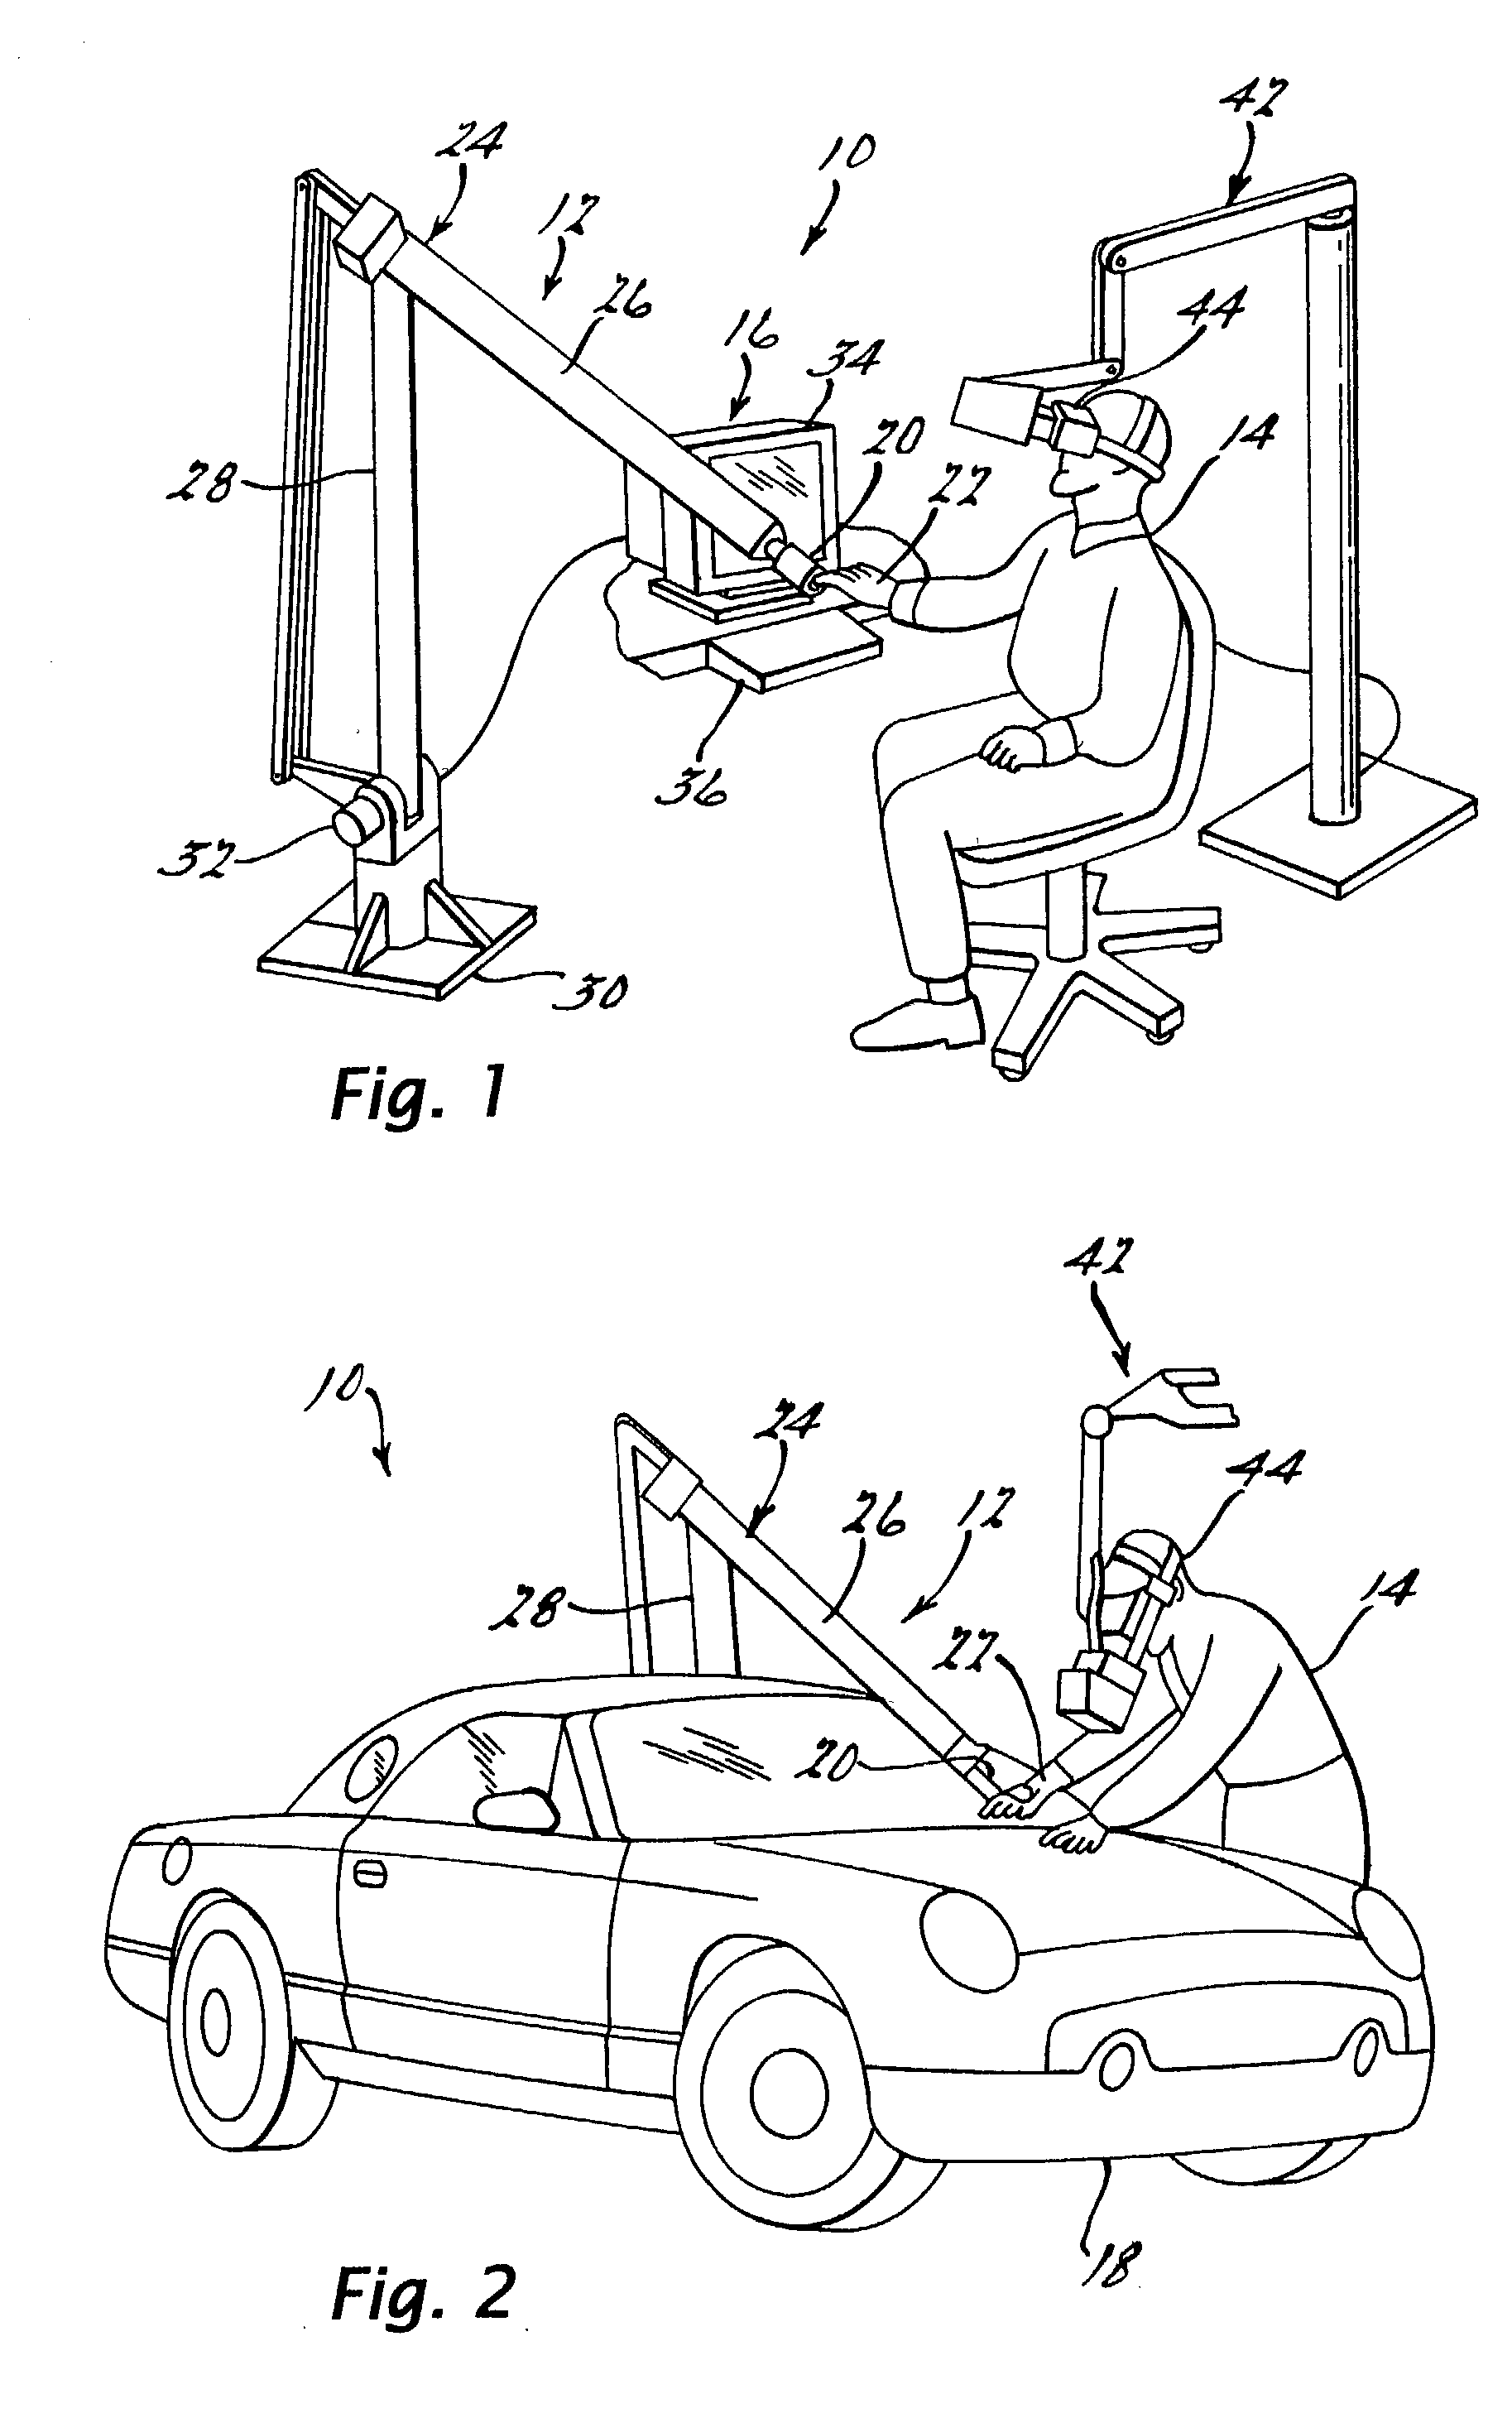 Method of real-time collision detection between solid geometric models